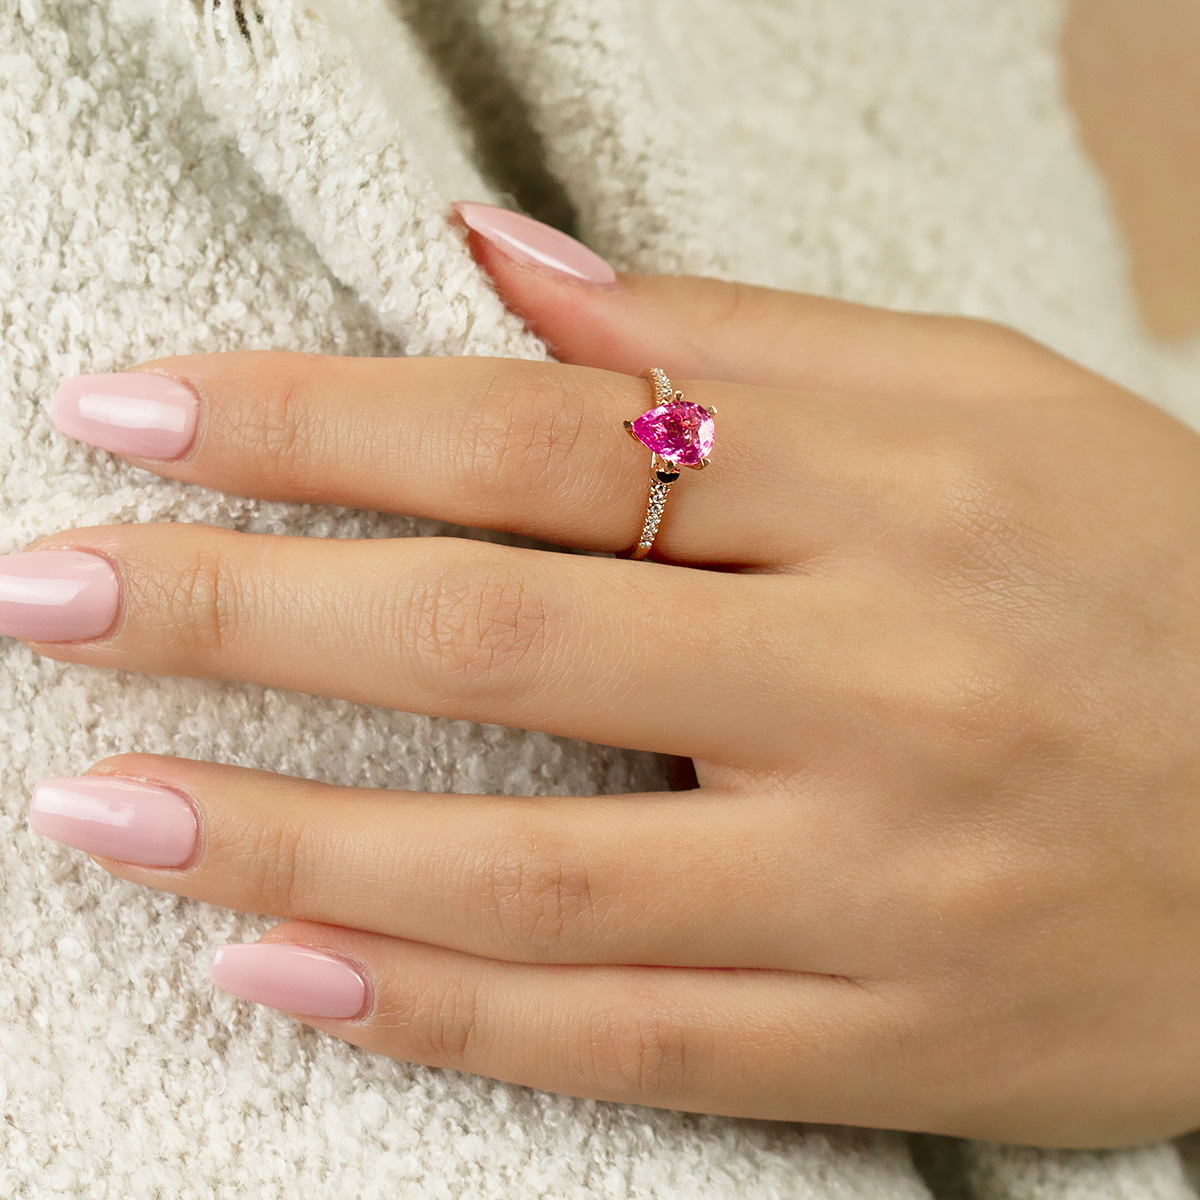 Designer diamond and pink sapphire ring by Parade Design.